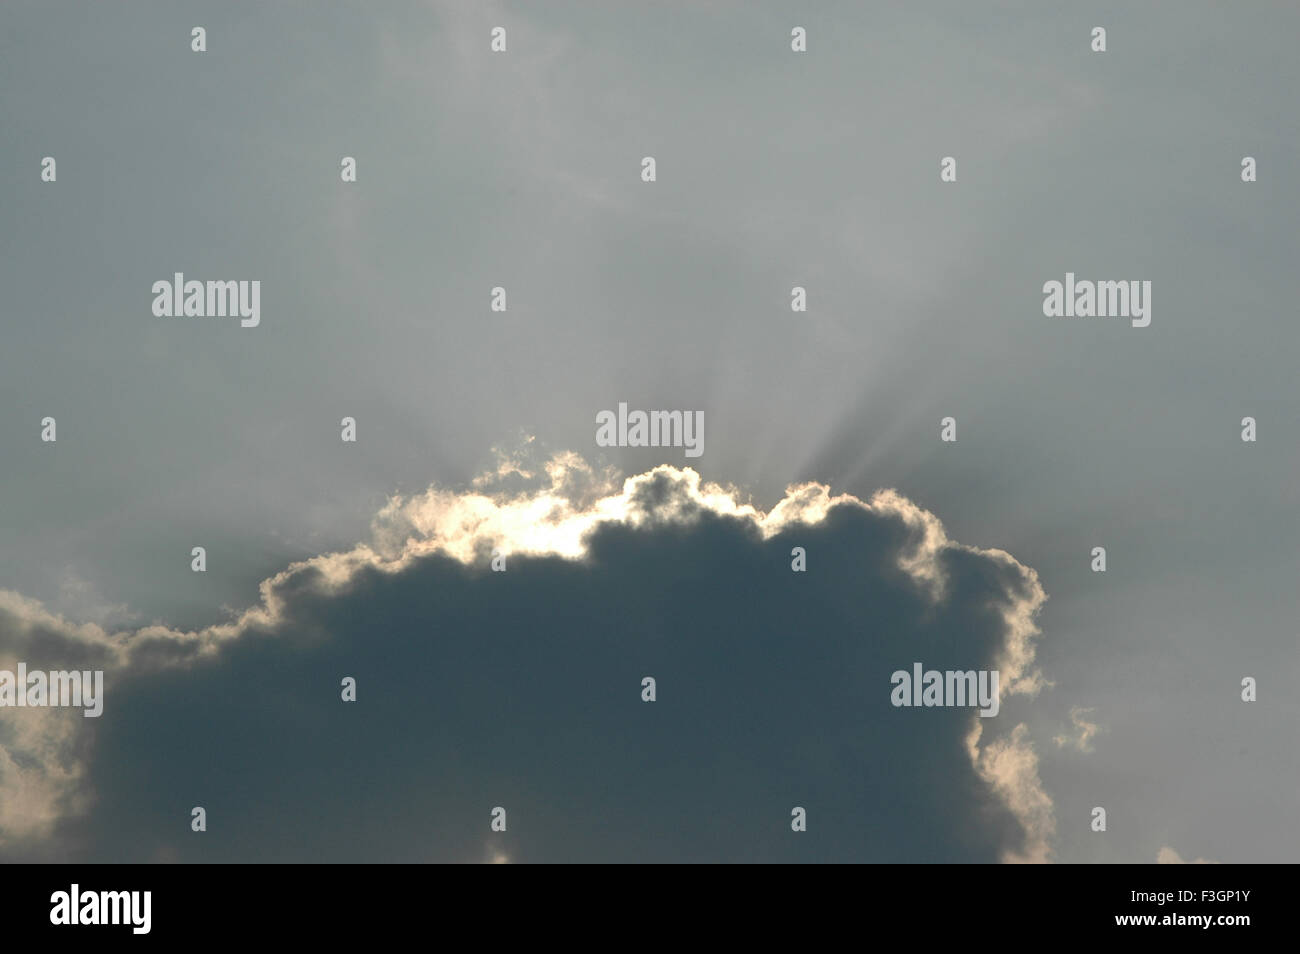 cloud with silver lining, sun hiding behind clouds, sun rays, sunlight, crepuscular rays, Stock Photo